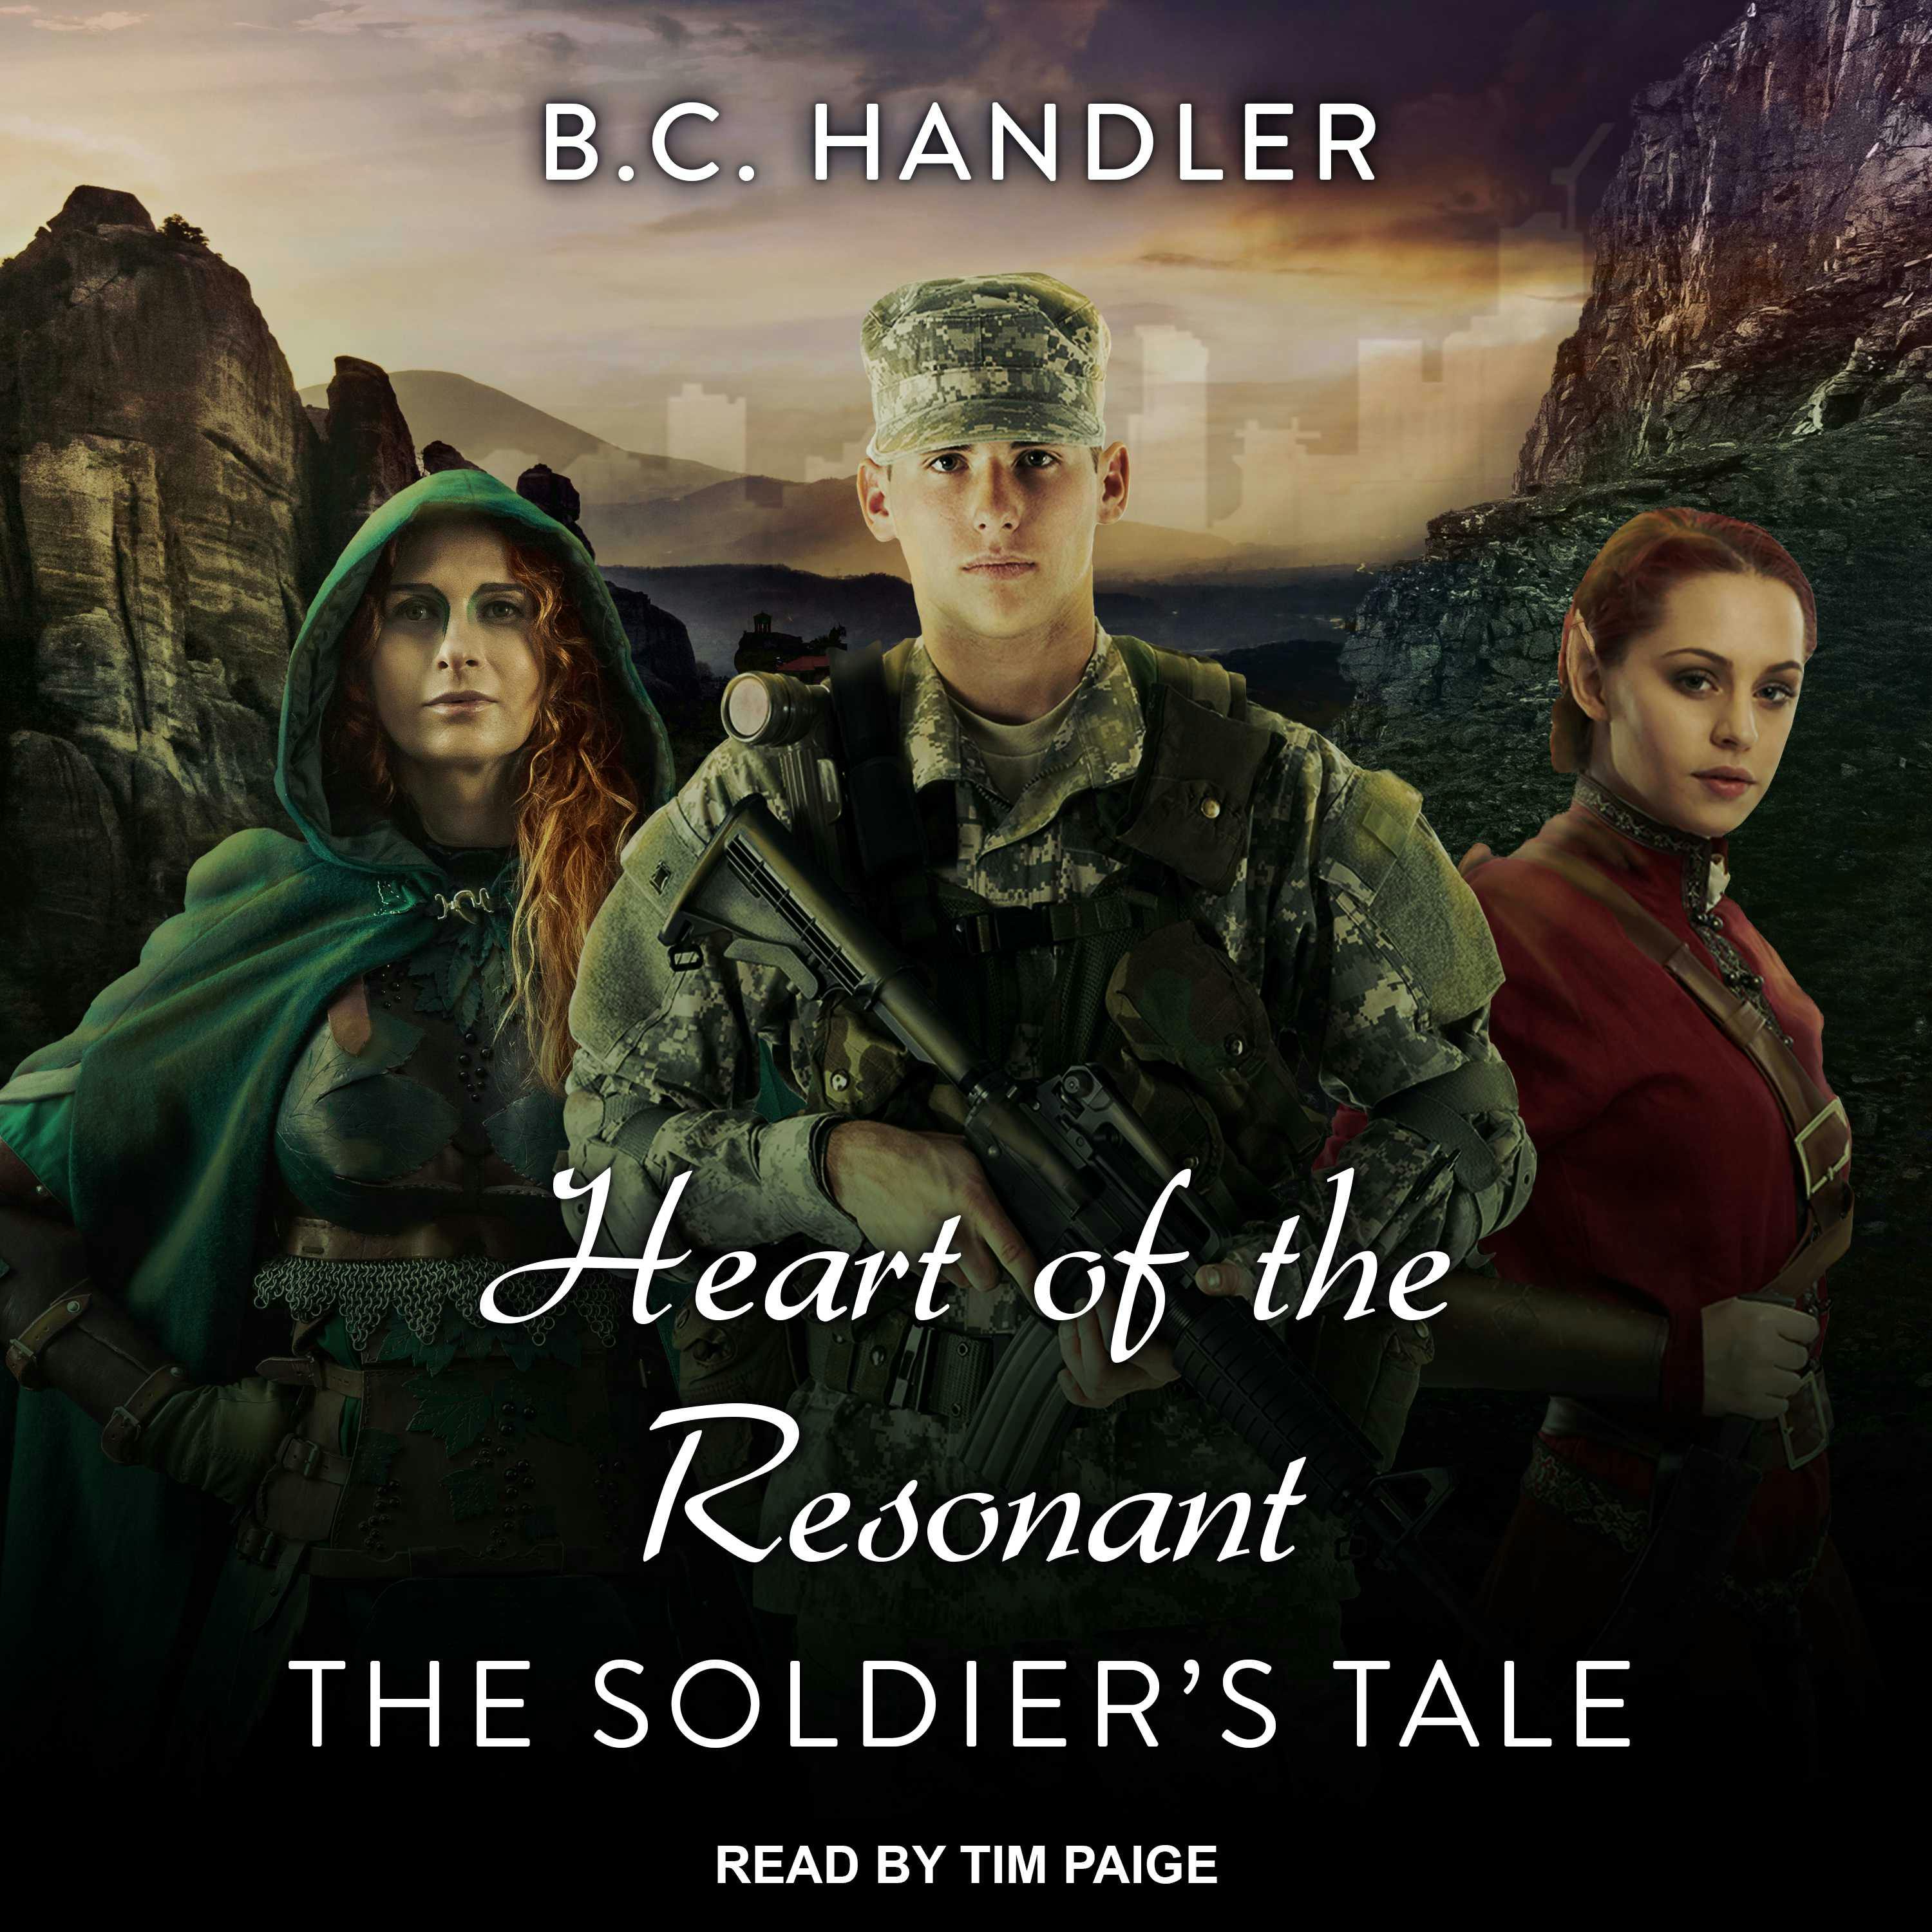 Heart of the Resonant: The Soldier's Tale - B.C. Handler